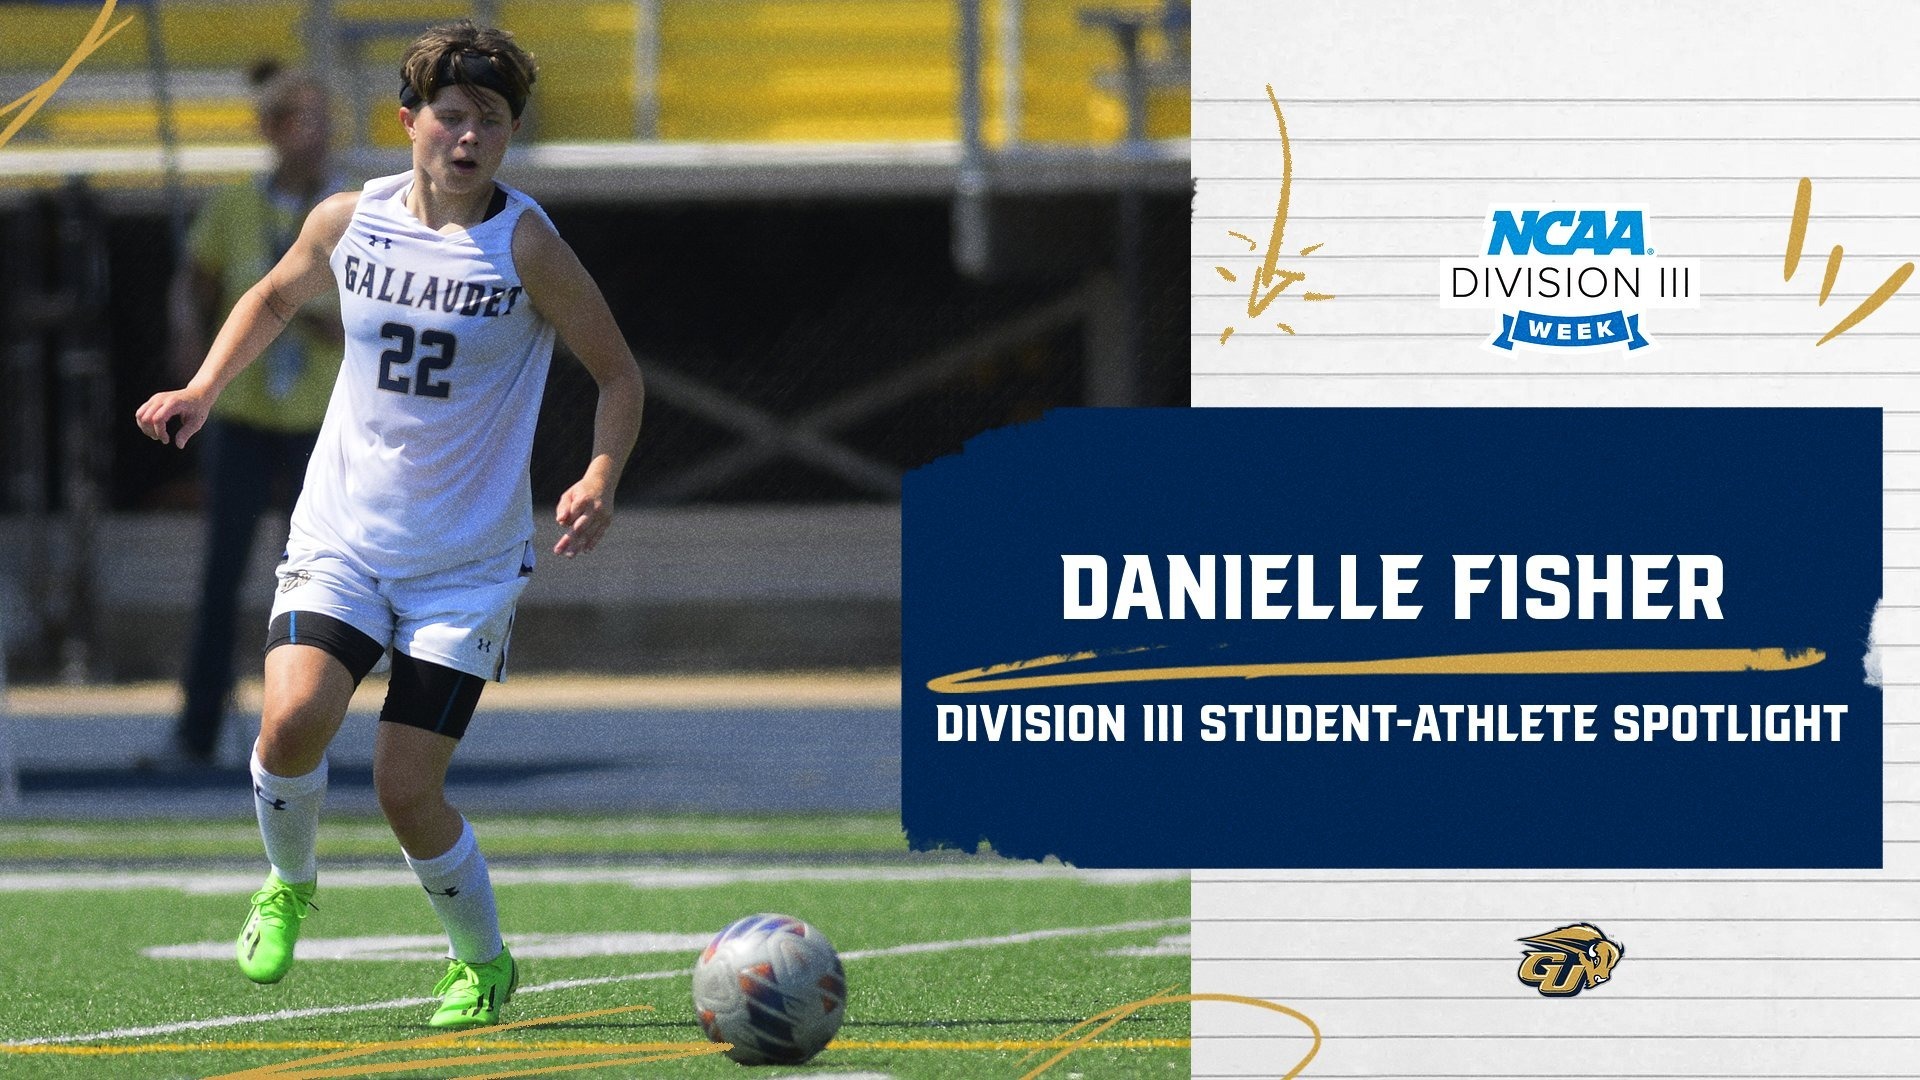 DIII Student-Athlete Spotlight: In My Own Words by Danielle Fisher